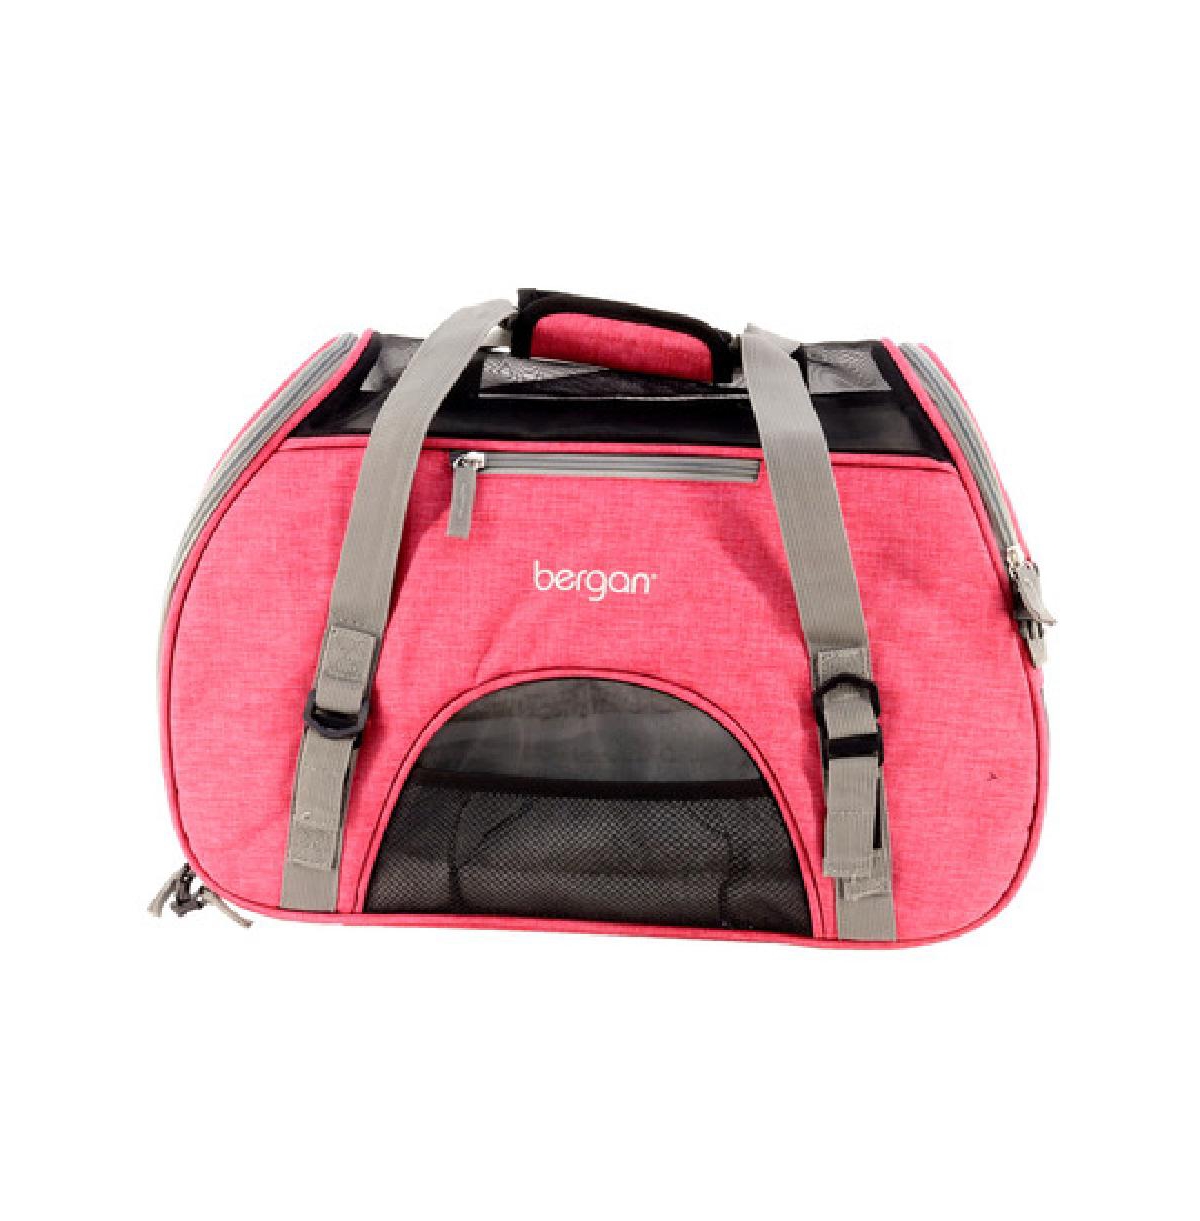 Pet Bergan - Comfort Carrier for Cat, Dog and Other Pets - Heather Berry (19 x 10 x 13 Inches) - Bright pink